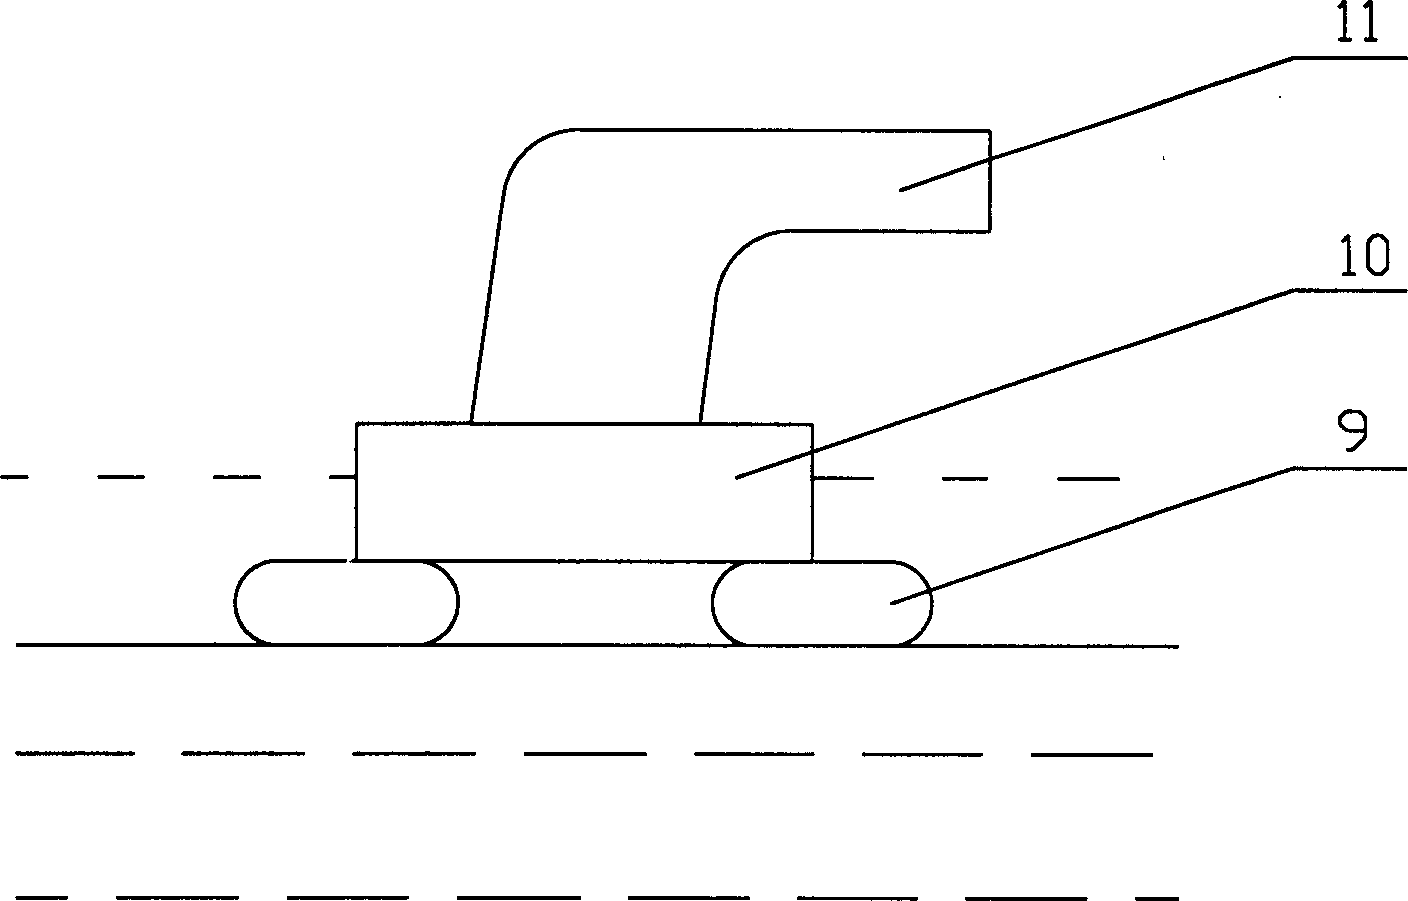 Fence type method for removing oil contamination from water surface